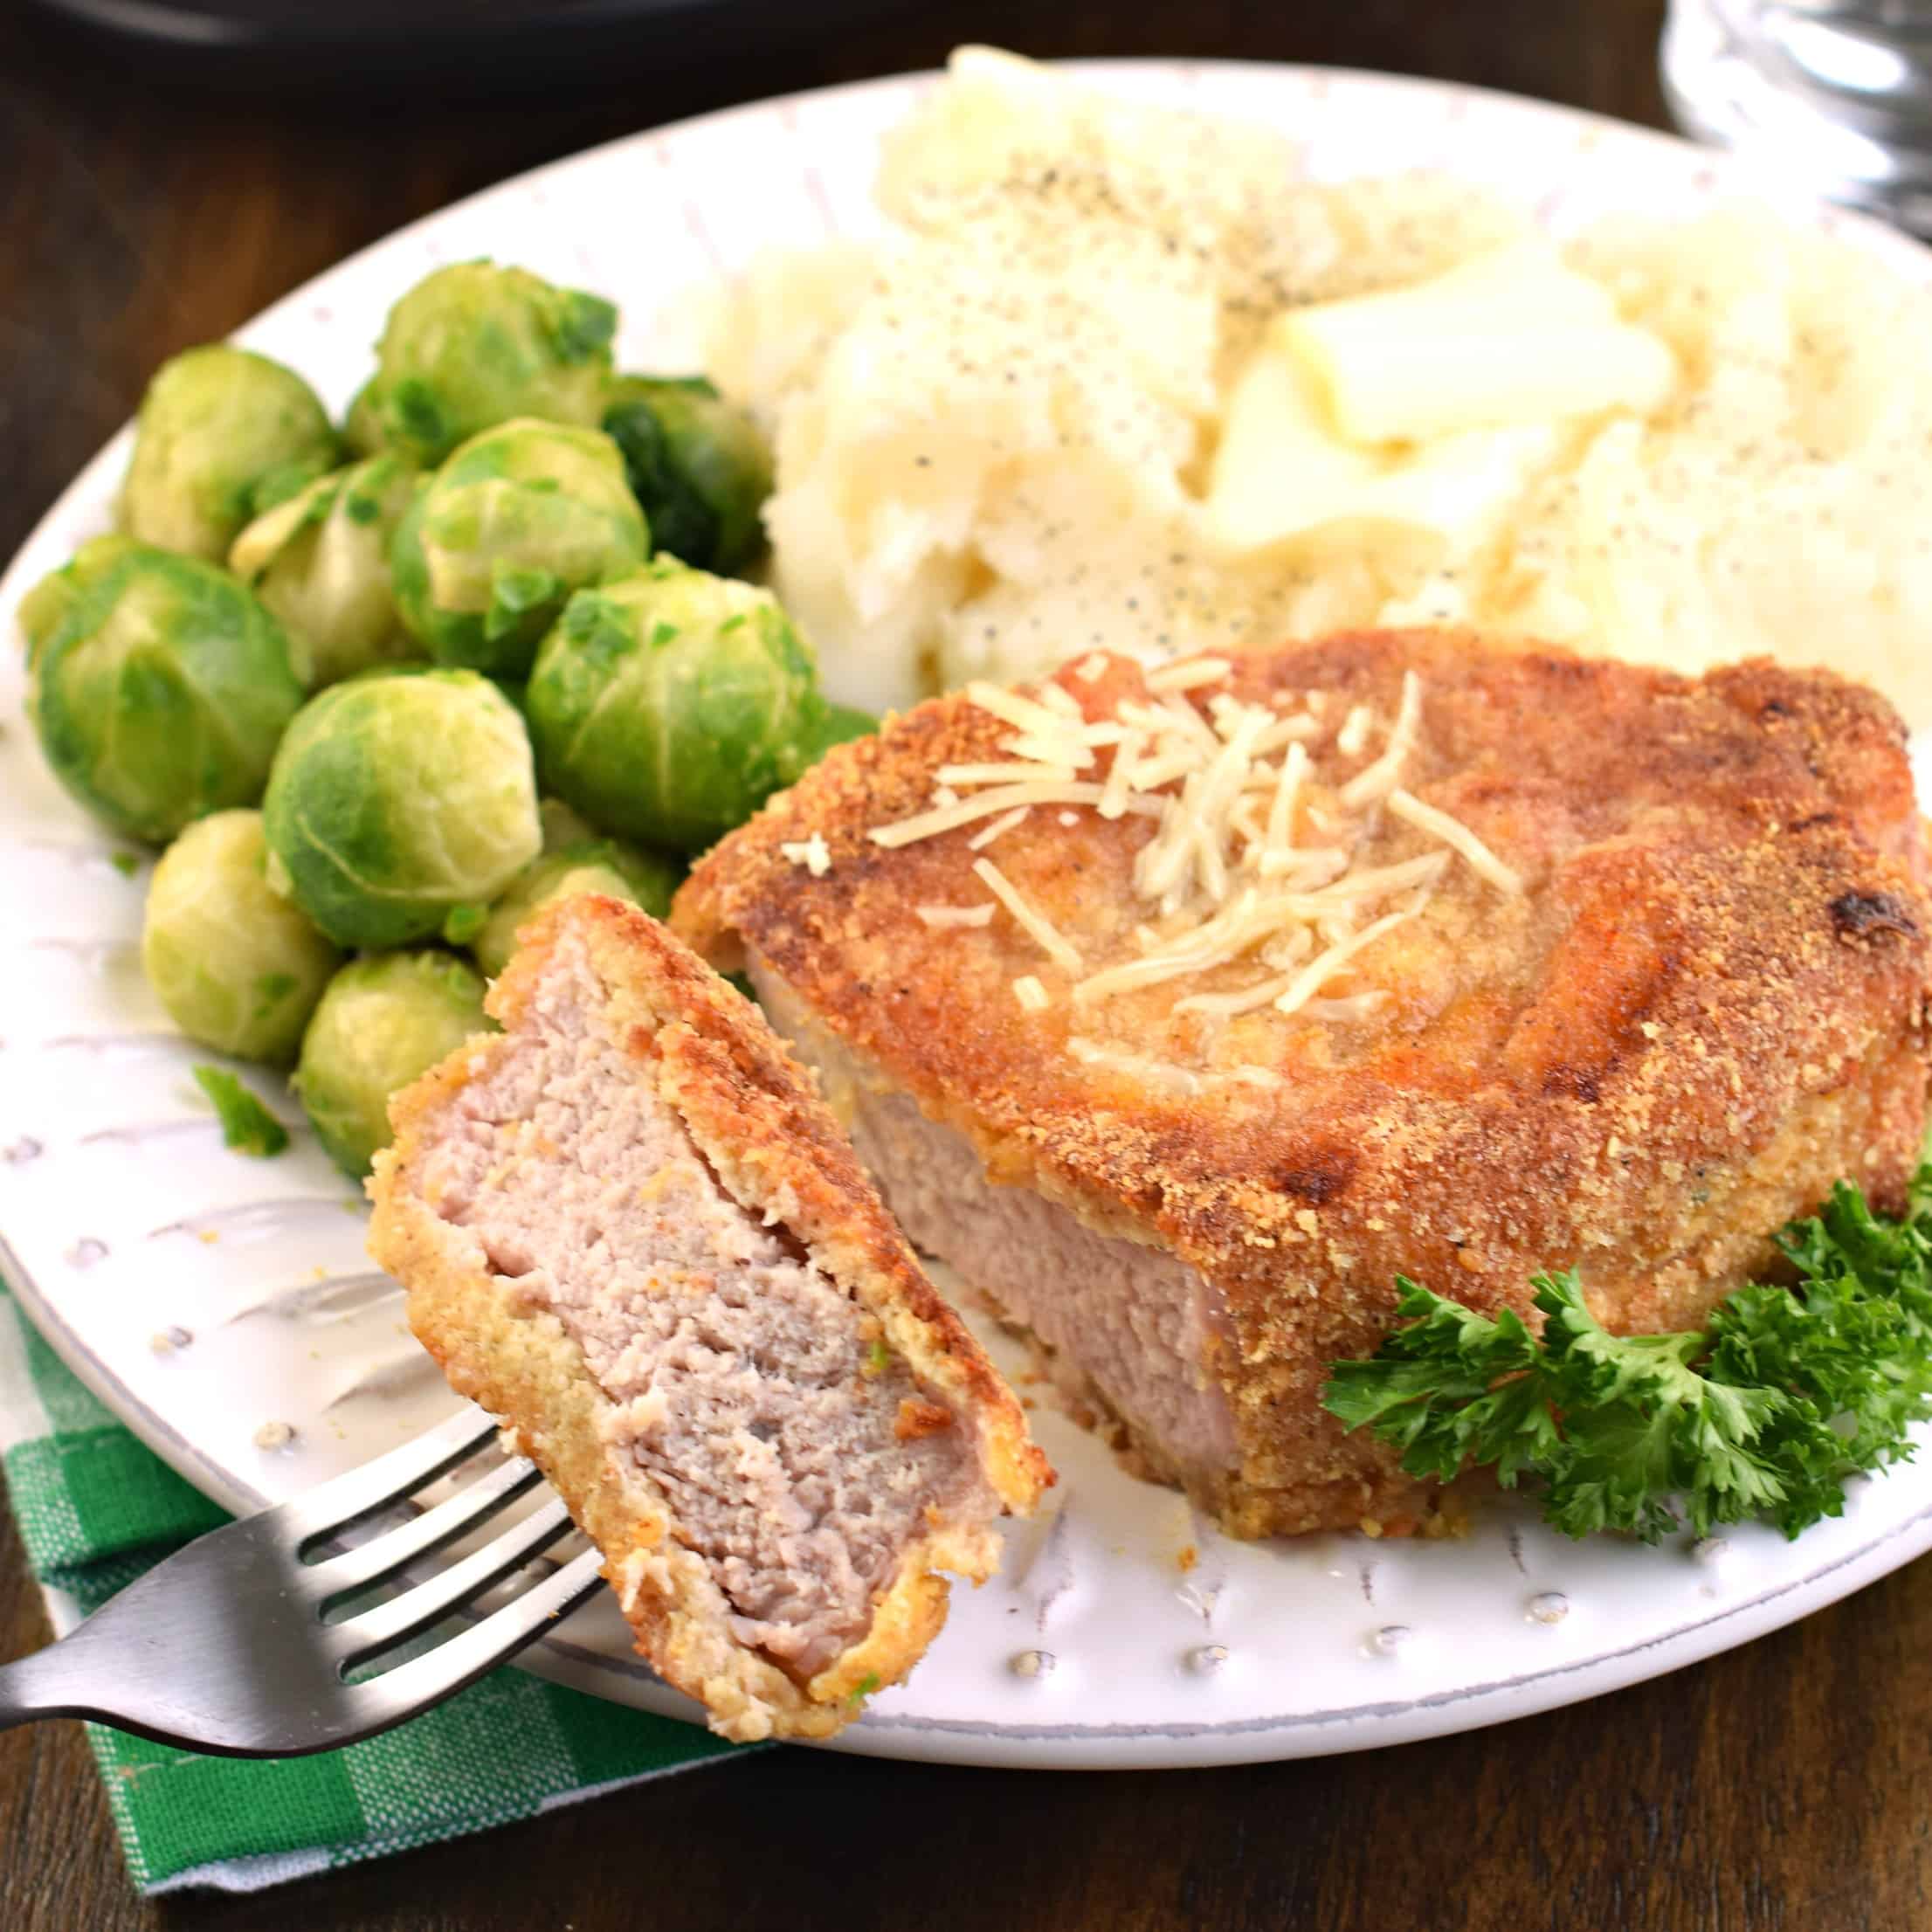 Find out how to get the perfect Oven Baked Parmesan Pork Chop